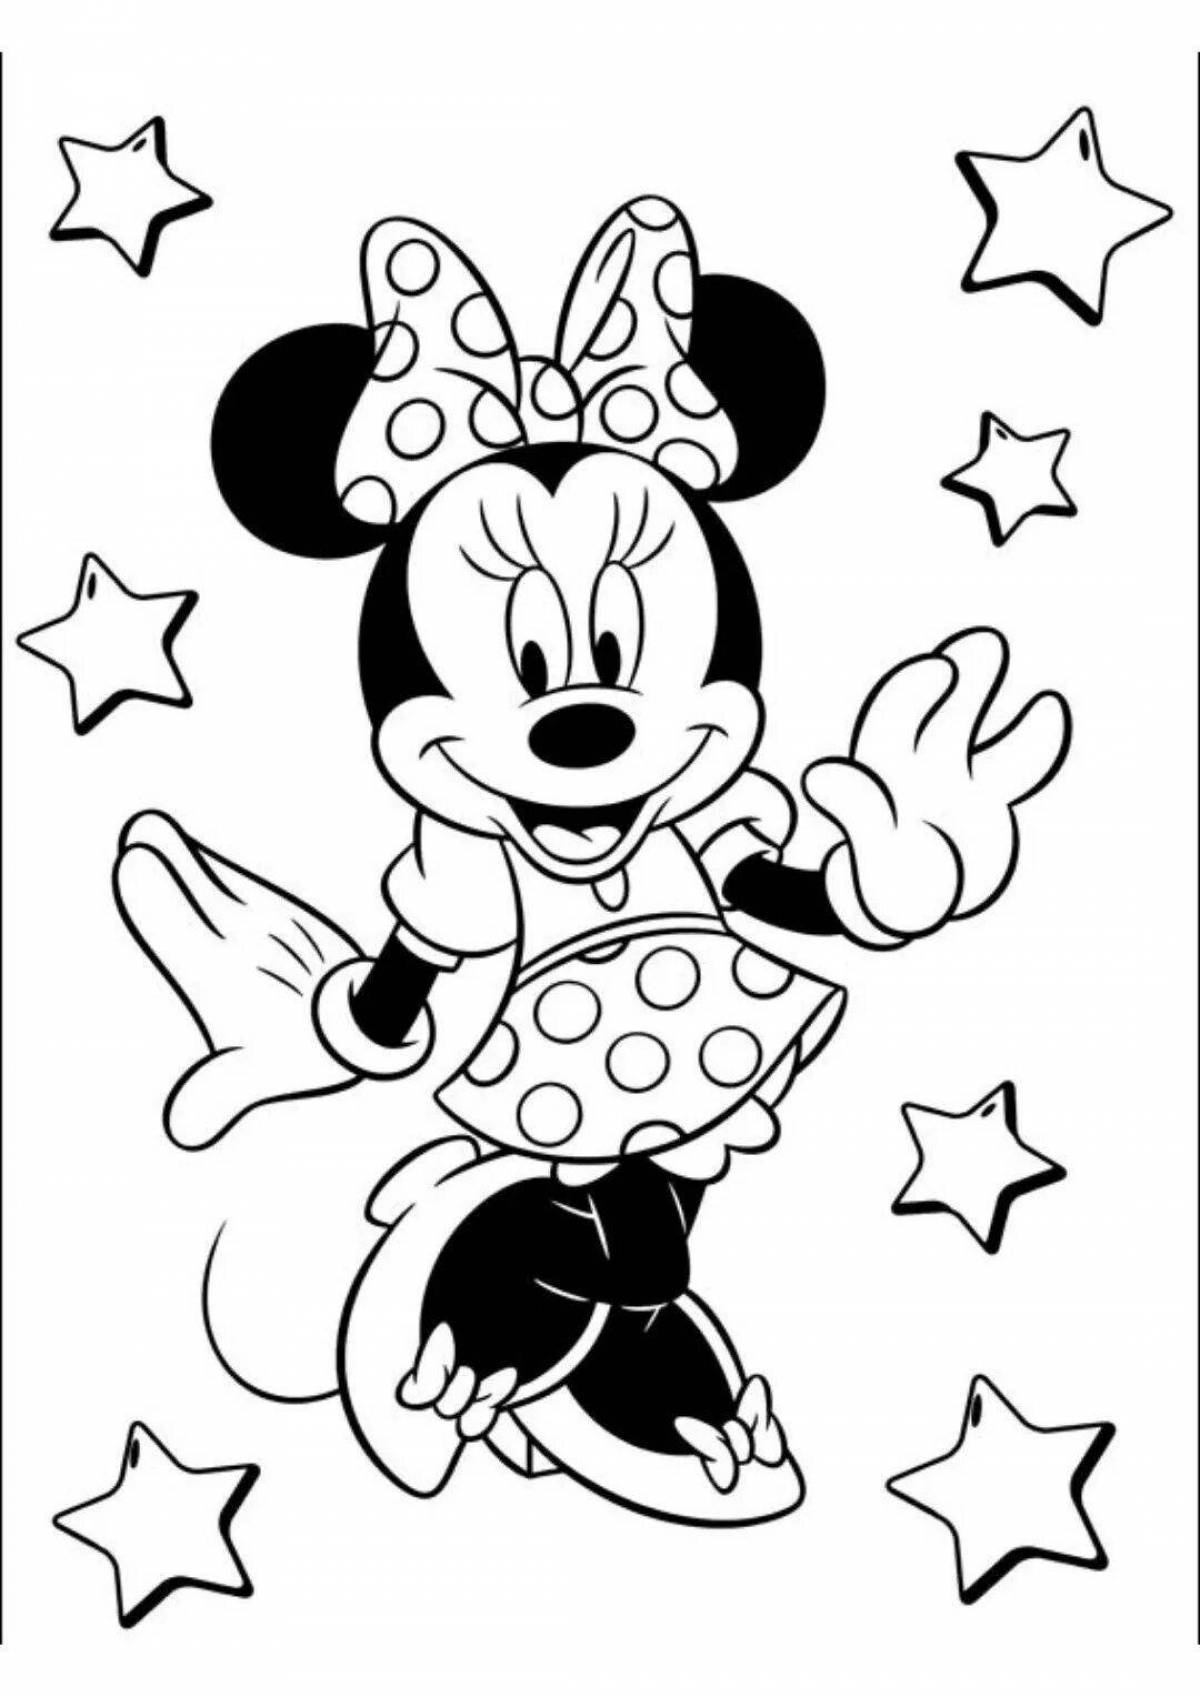 Charming mickey mouse coloring book